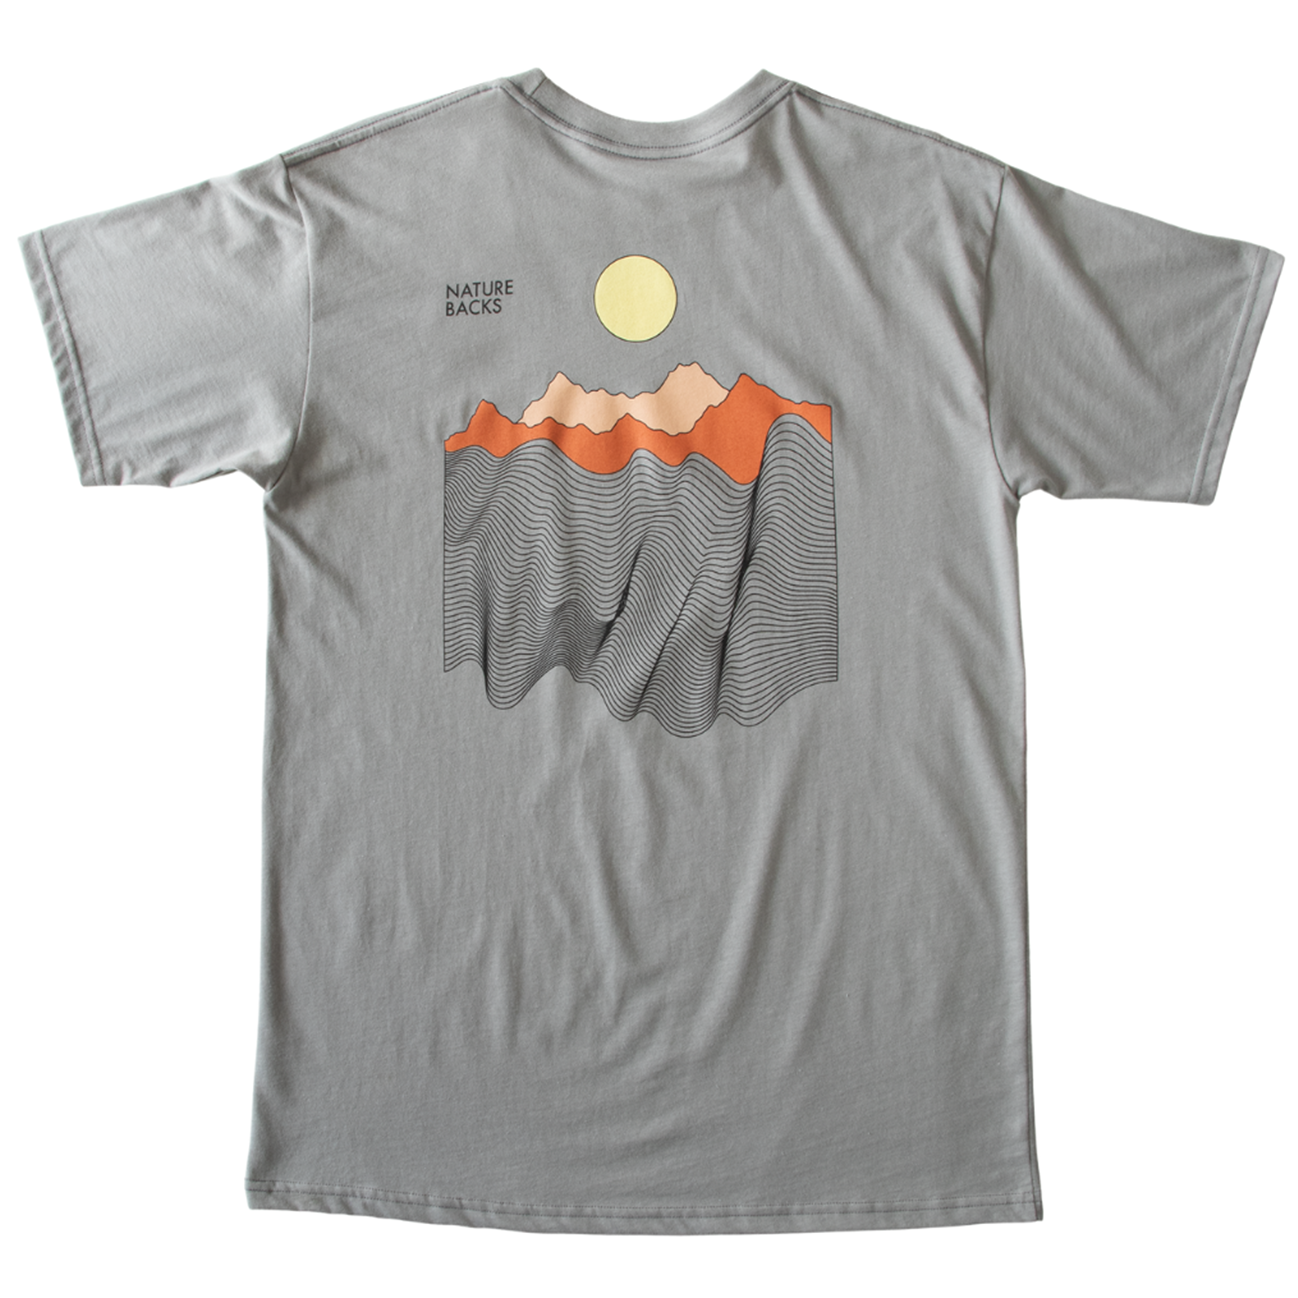 Nature Backs Limited Edition Short Sleeve 100% Organic Cotton T-Shirt | Limited Ebb and Flow Slate Short Sleeve made with Eco-Friendly Fibers Sustainably made in the USA 